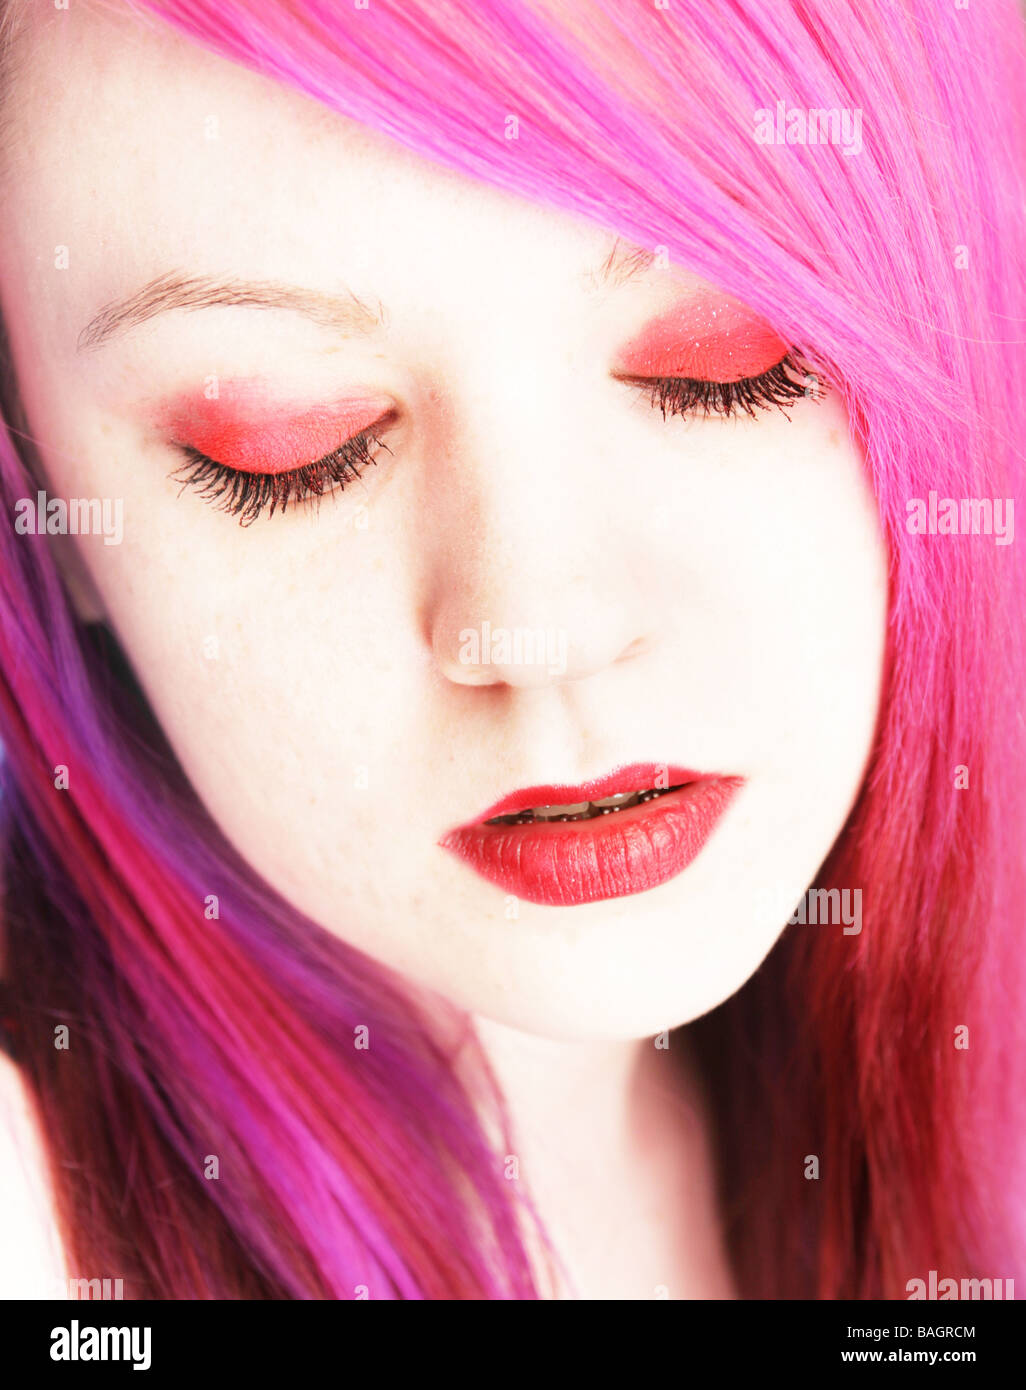 Close up of an alternative looking teen with bright pink hair red lips and pale skin Stock Photo